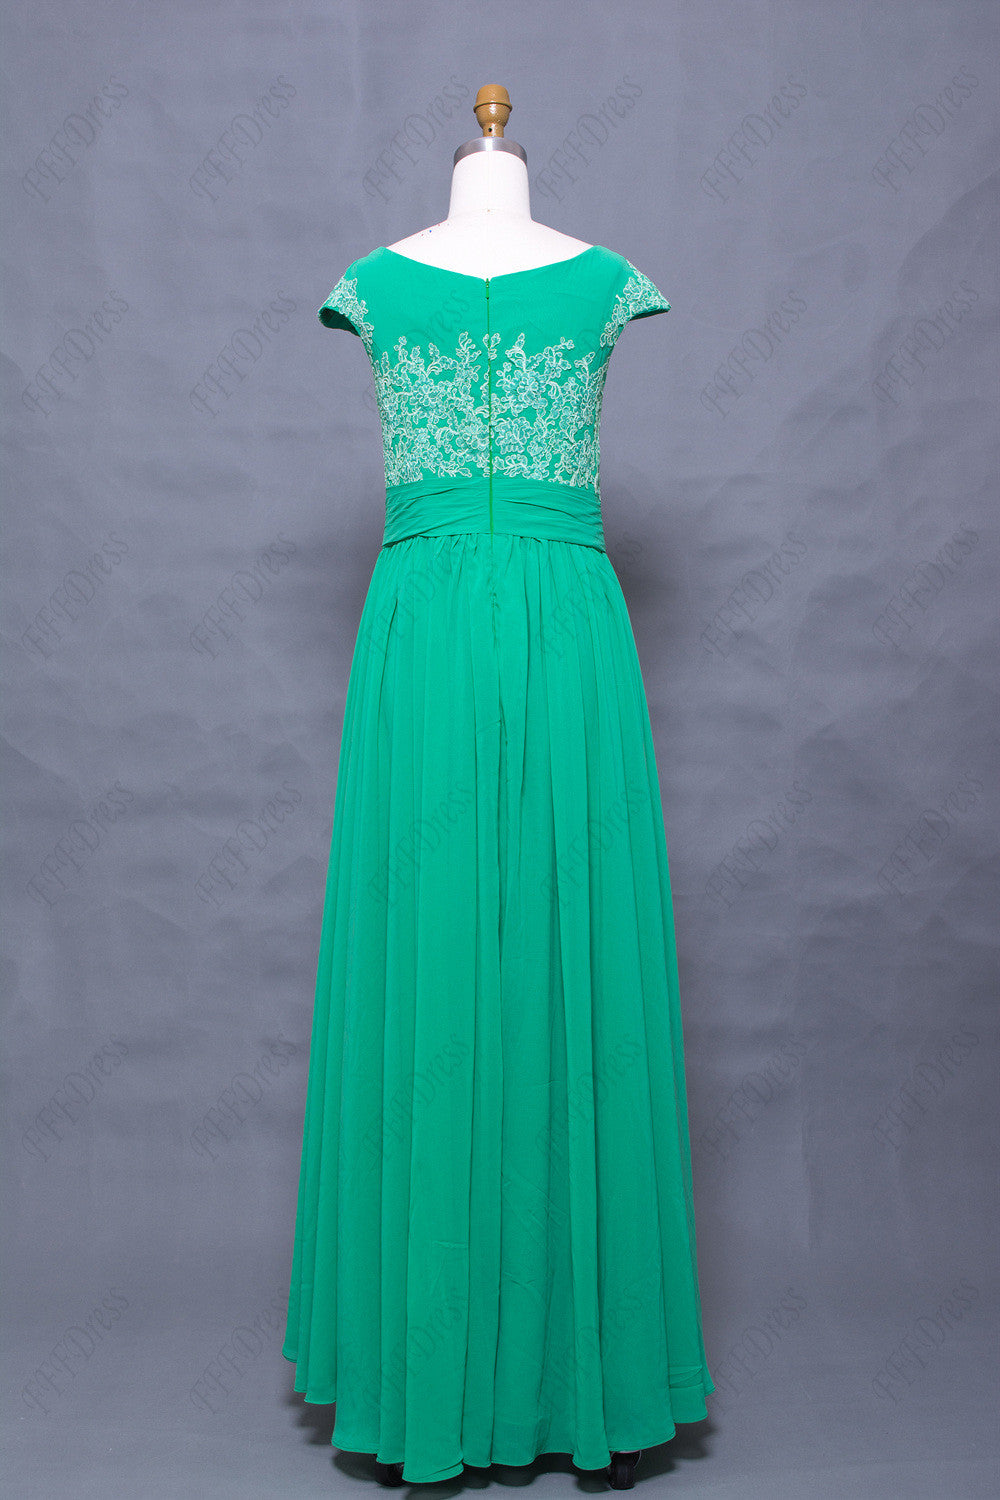 Green modest prom dresses long with cao sleeves